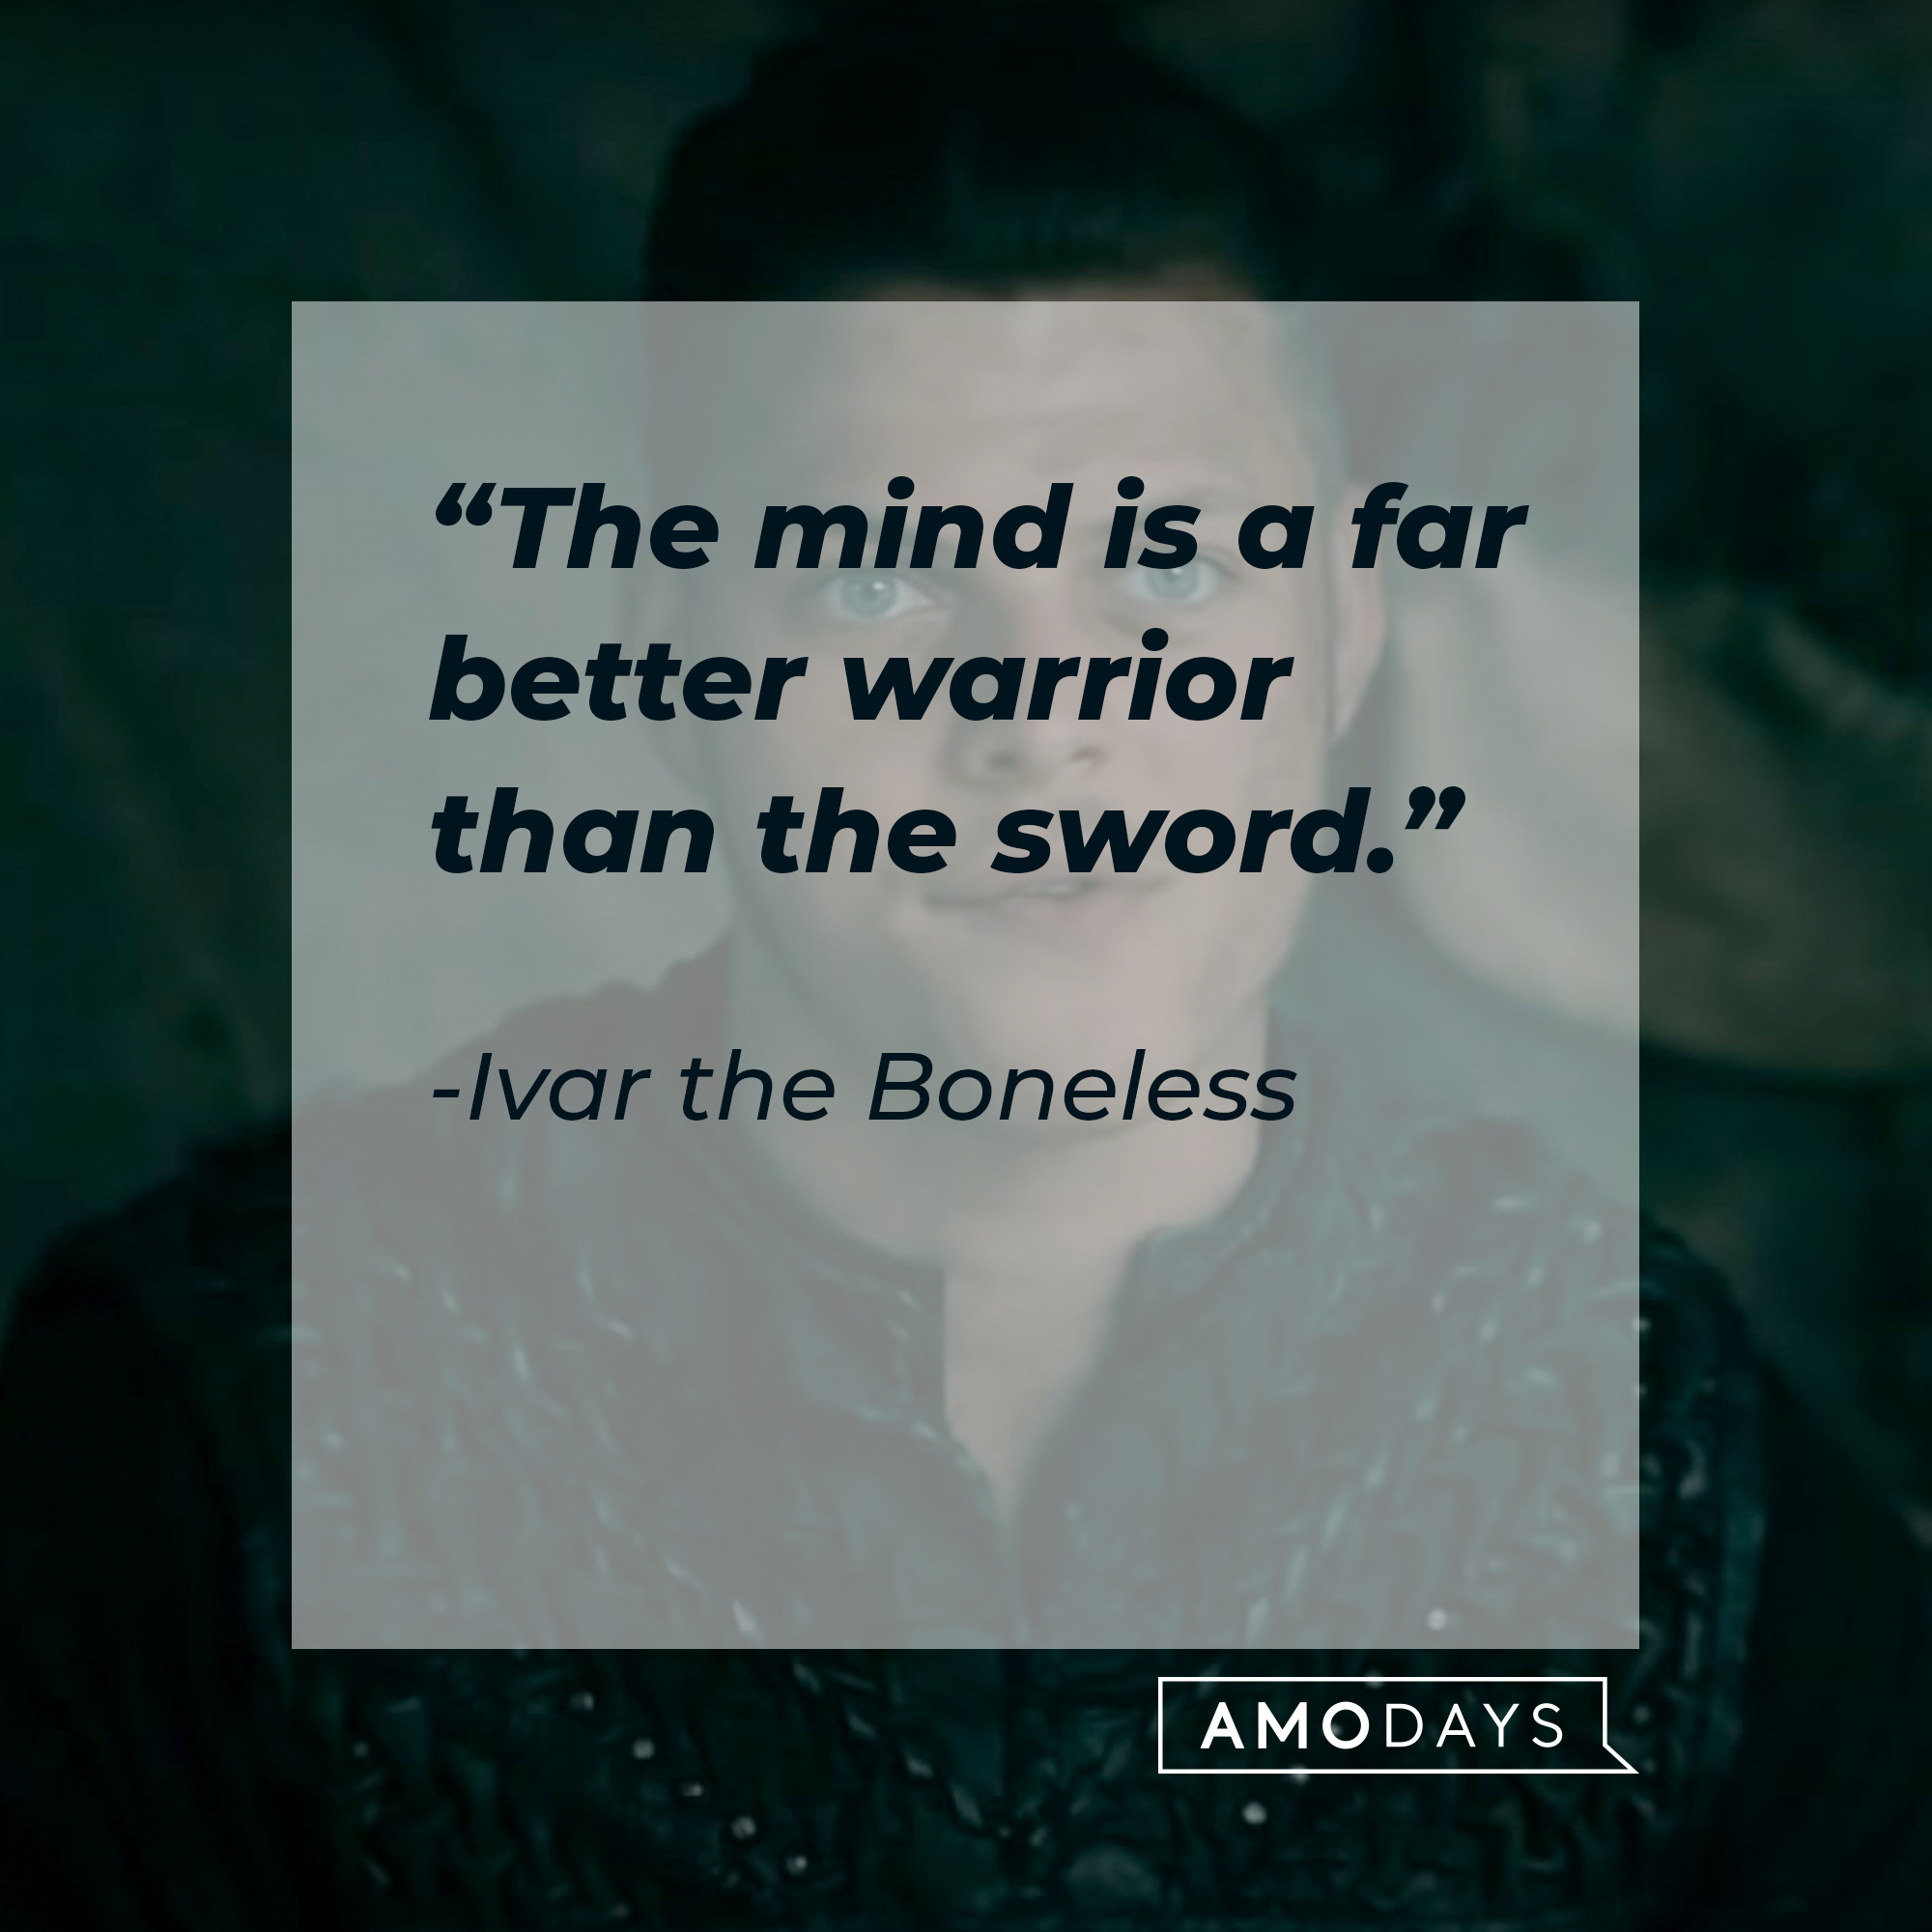 A picture of Ivar the Boneless with his quote: “The mind is a far better warrior than the sword.”┃Source: youtube.com/PrimeVideoUK